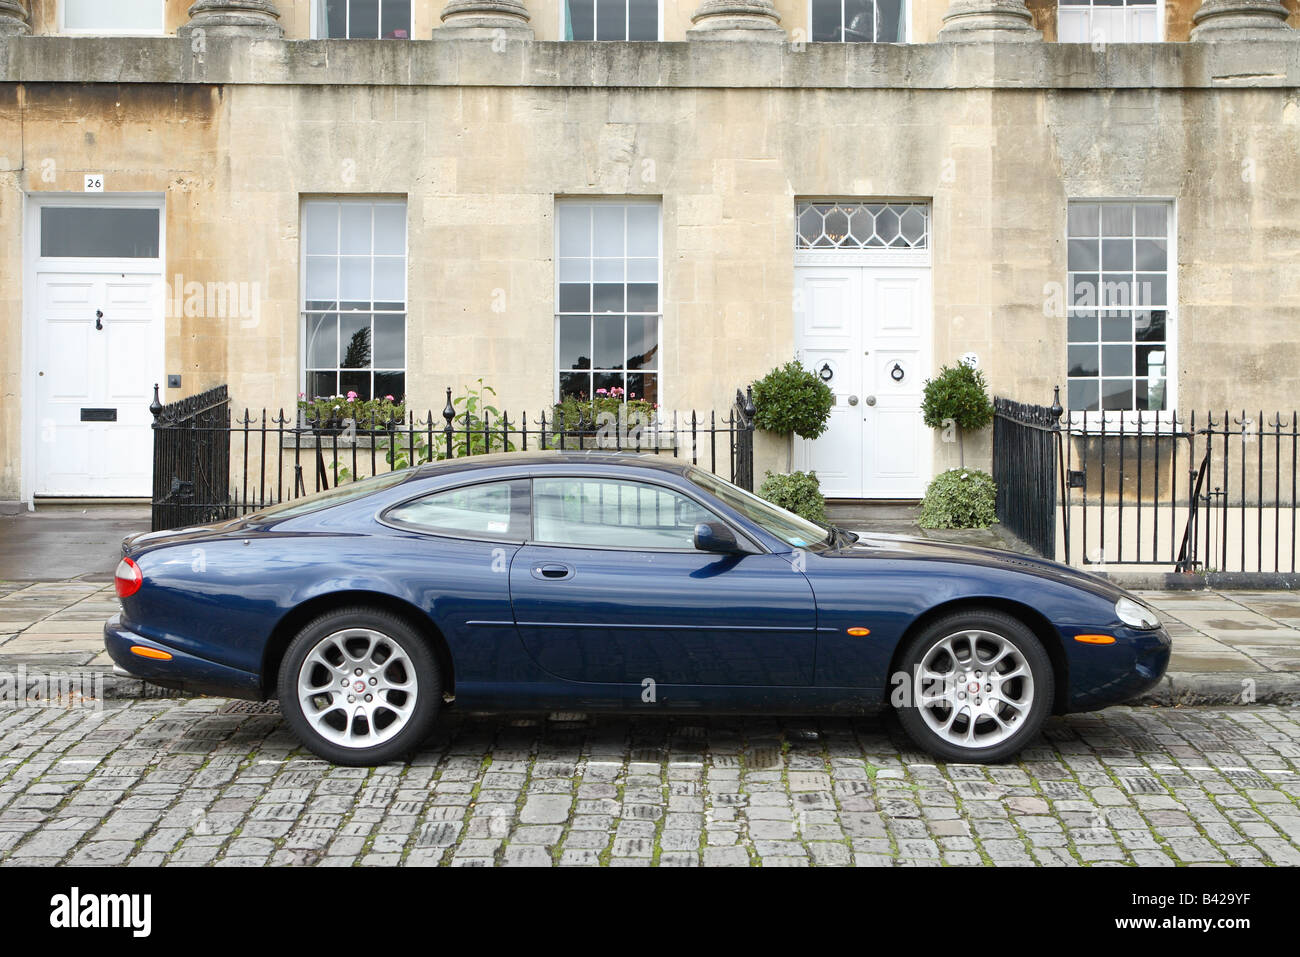 Jaguar XKR expensive sports coupe car parked on cobbles in The Royal Crescent in Bath England in Autumn Stock Photo